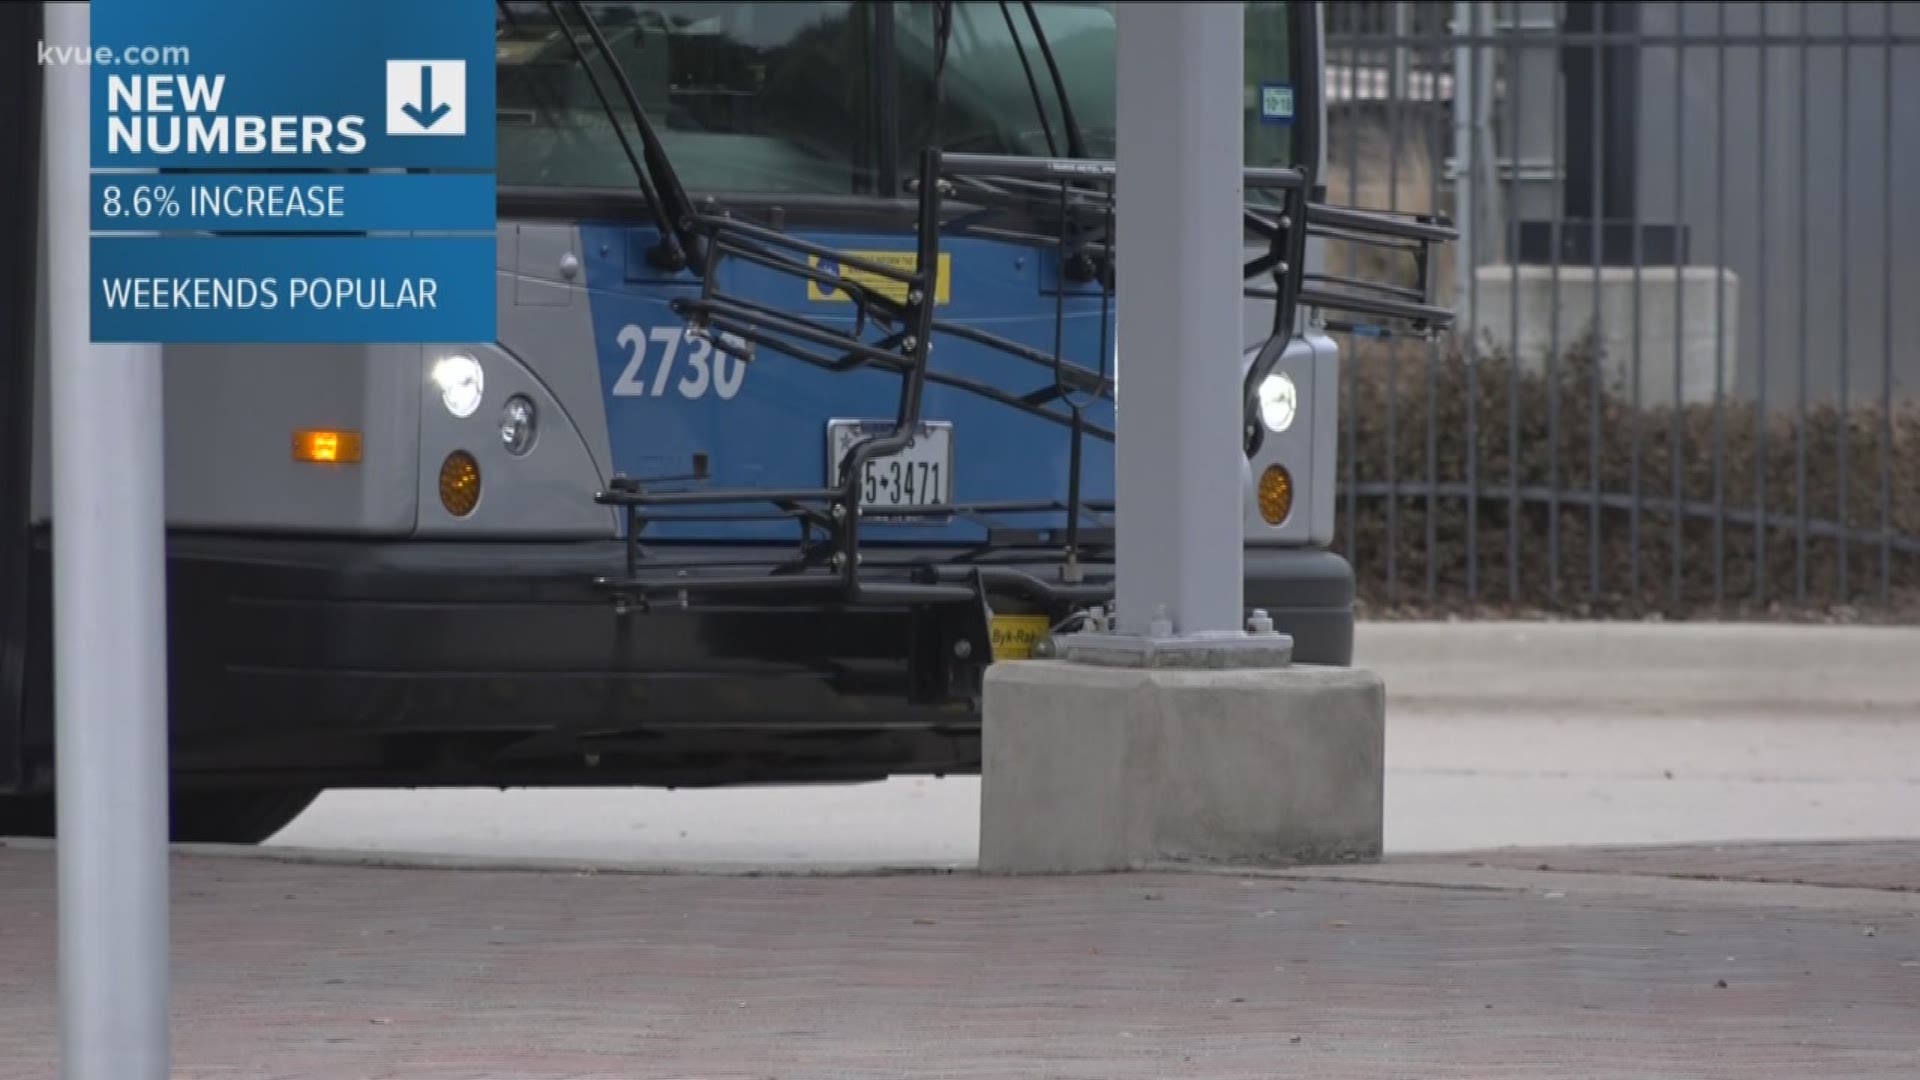 More people are opting for public transit in the Austin area, according to Capital Metro.